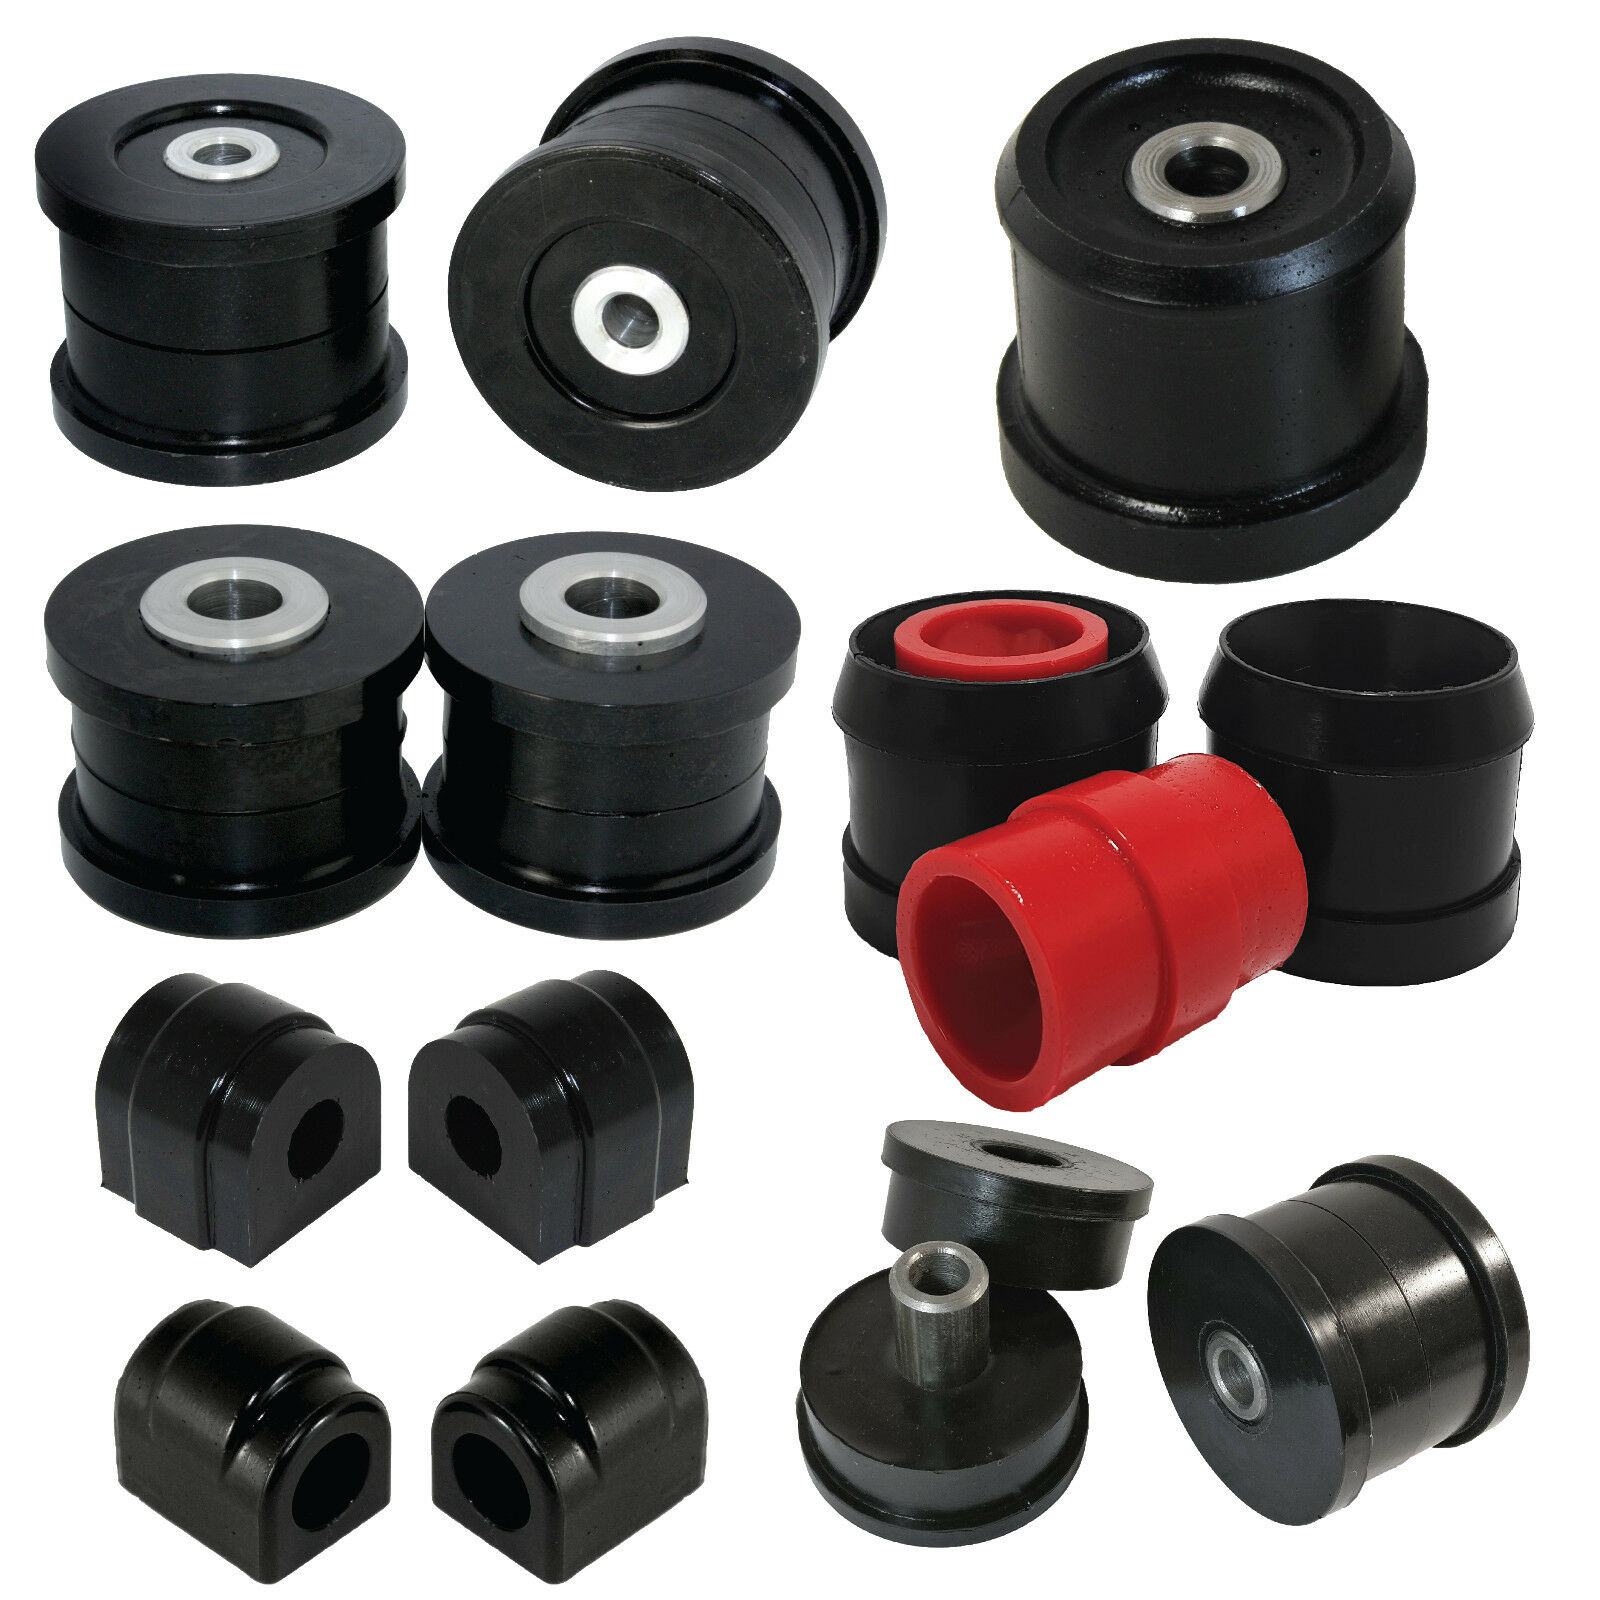 PSB 600 4x Trailing Arm Movement Limiter Poly Bushing Kit Compatible With 98-05 BMW E46 3 Series 